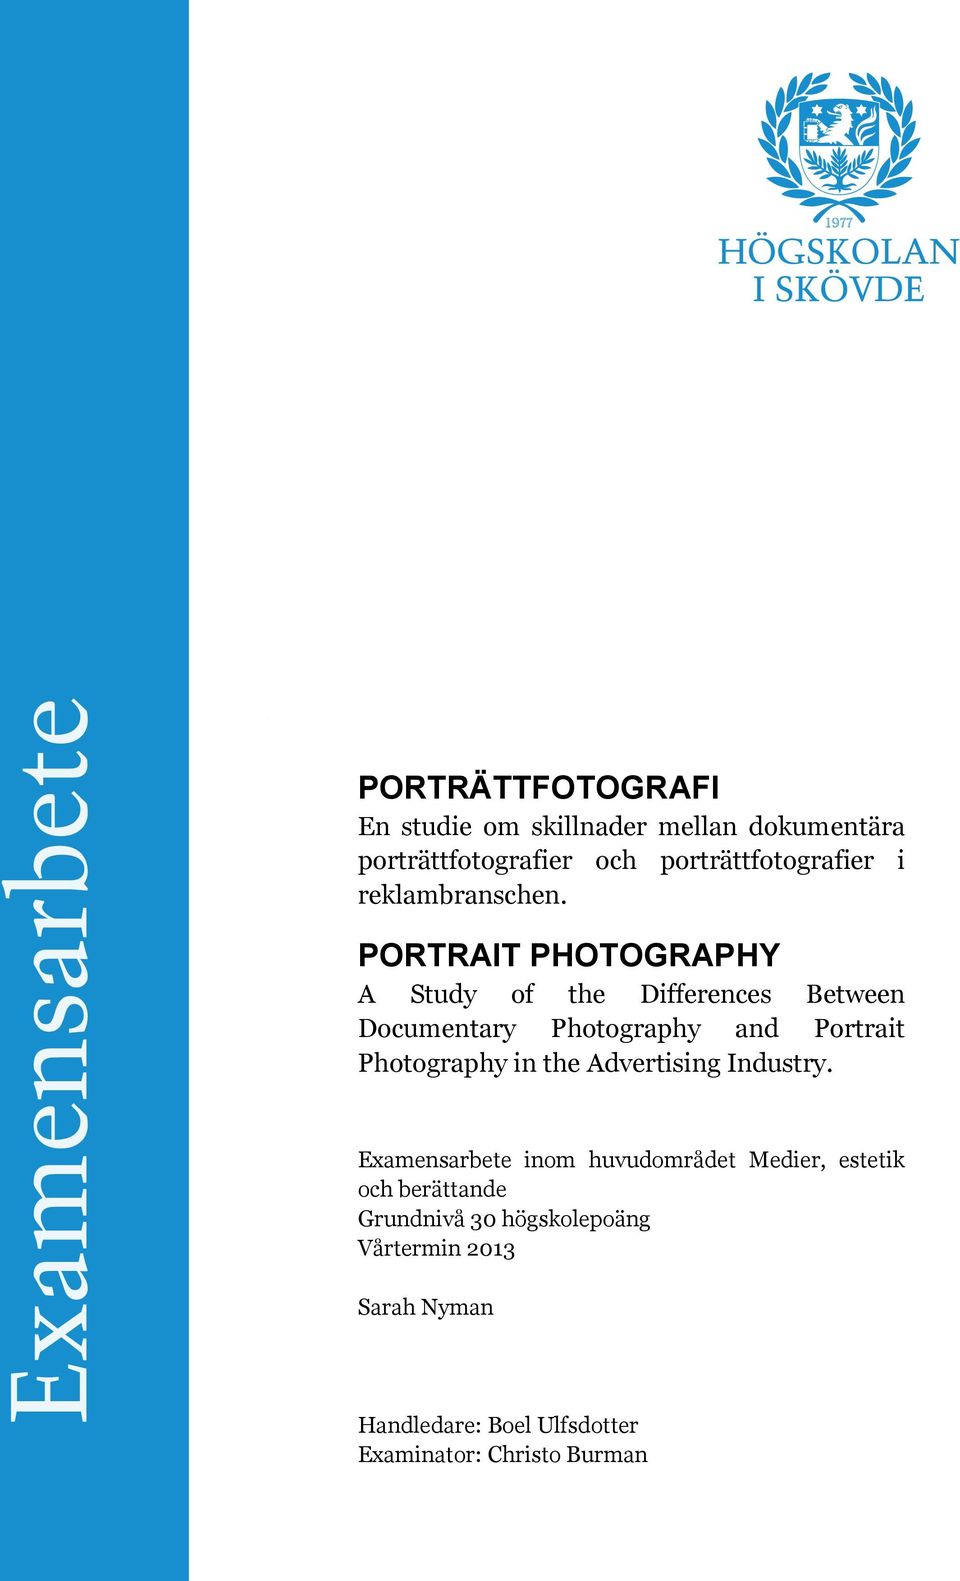 PORTRAIT PHOTOGRAPHY A Study of the Differences Between Documentary Photography and Portrait Photography in the